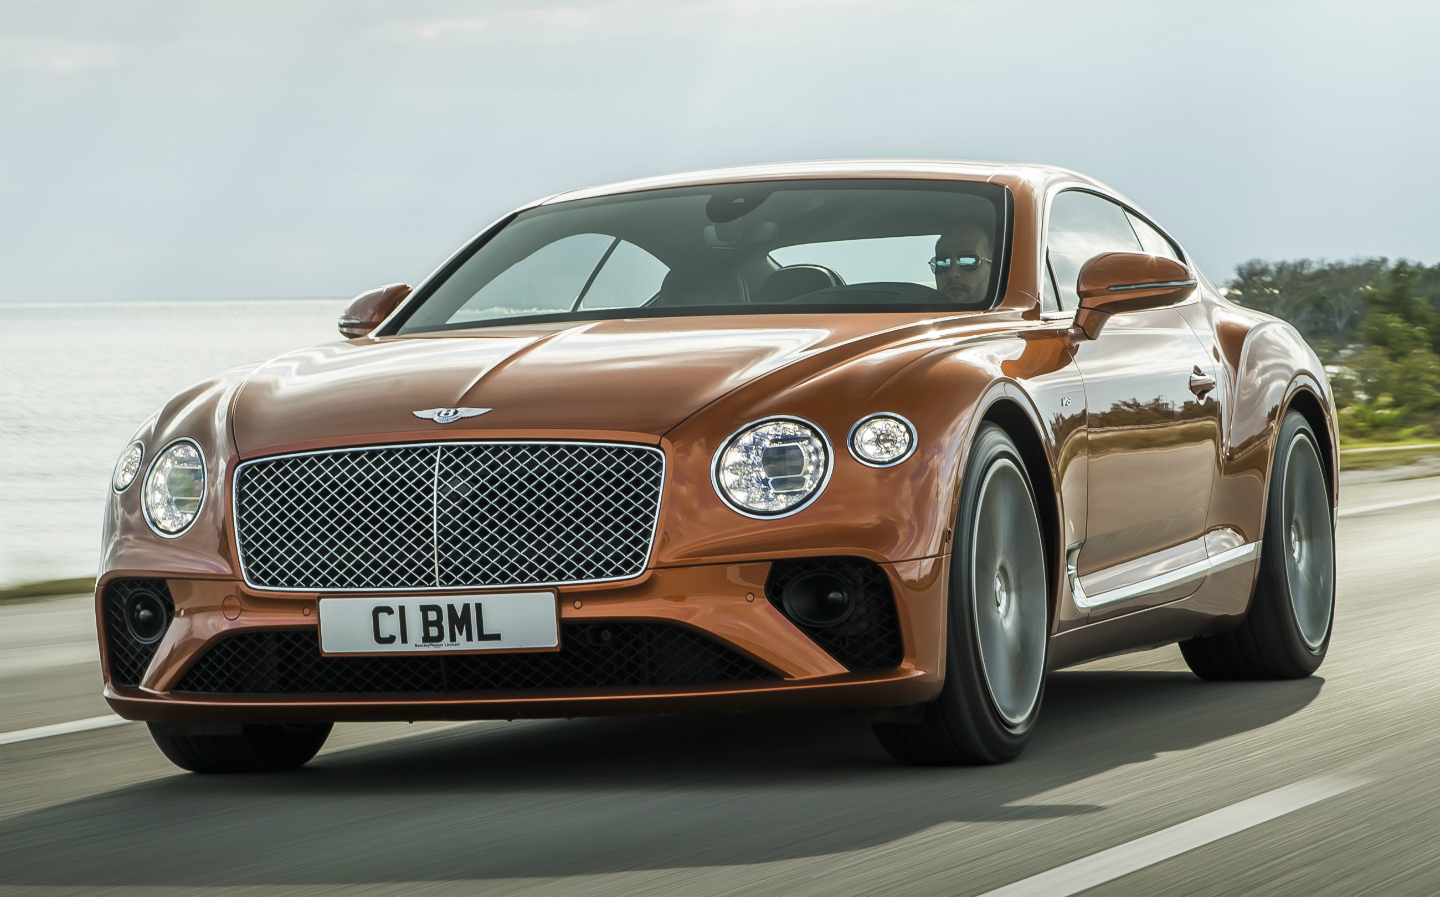 Sunday Times Motor Awards 2019 Best British-Built Car of the Year. Bentley Continental GT V8